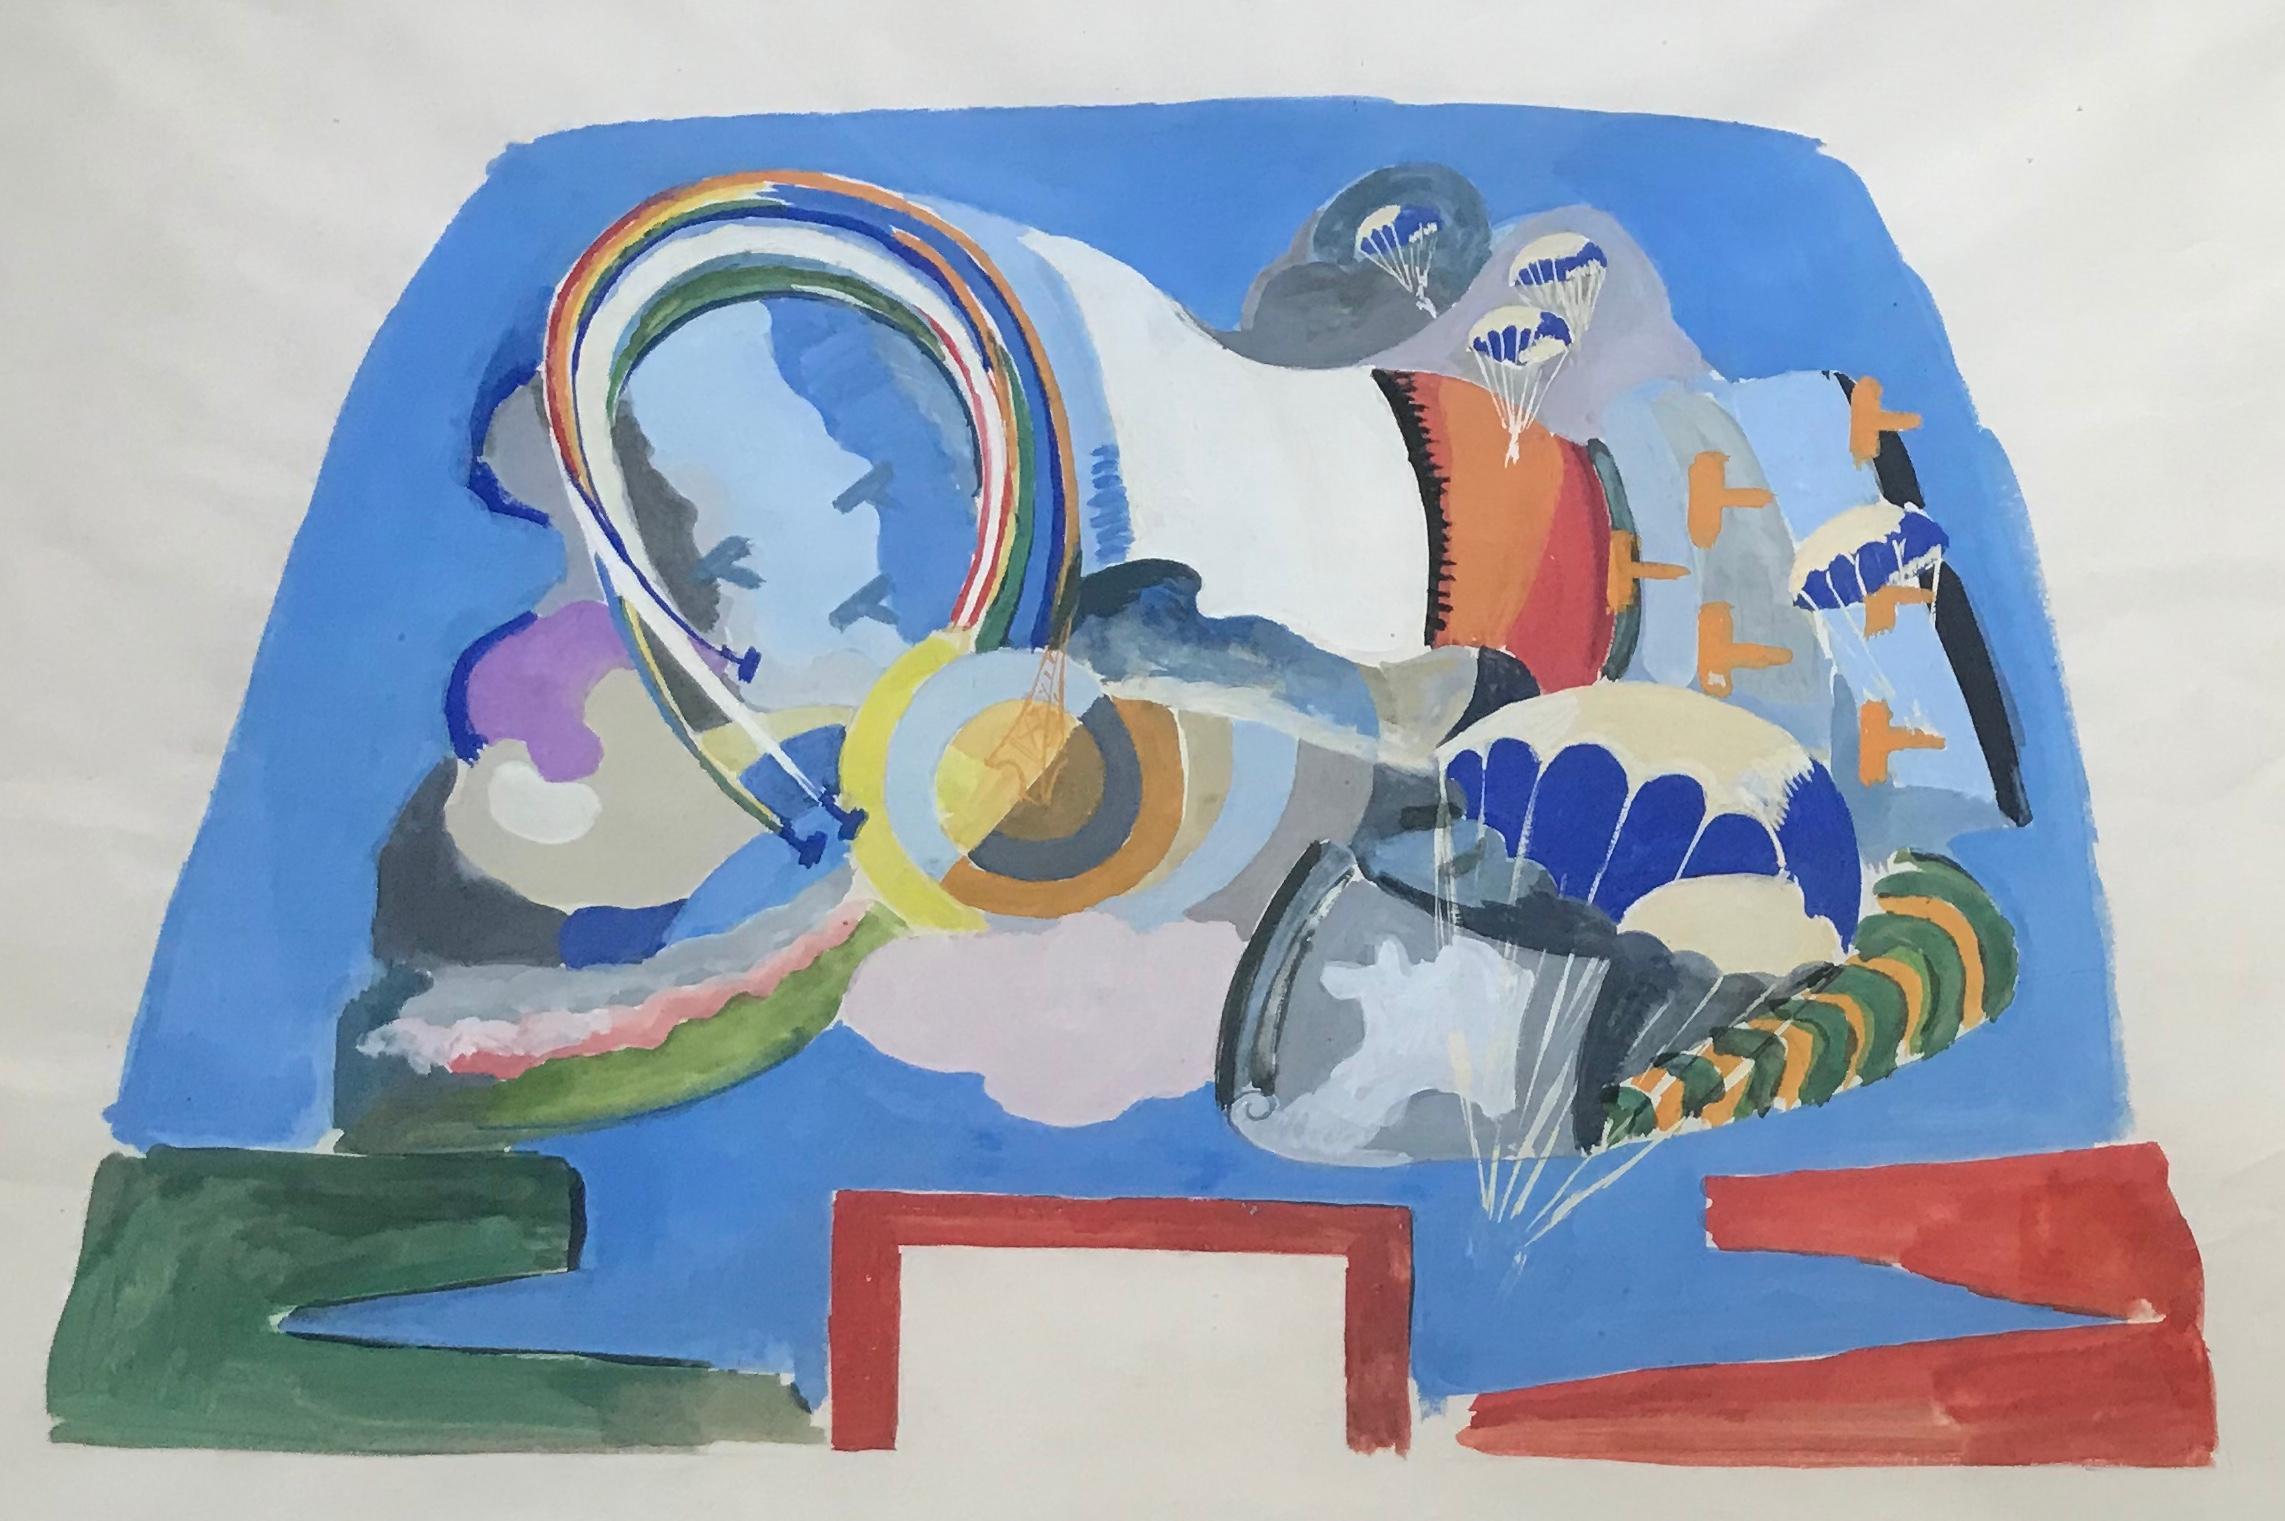 Study fot he tronconic hall of the Air Palace, 1937. Gouache on paper.
This is a study most this artist's most important artistic work.

Son of the painter Albert Aublet, Felix enrolled in the “Ecole des Beaux Arts de Paris“ in order to study